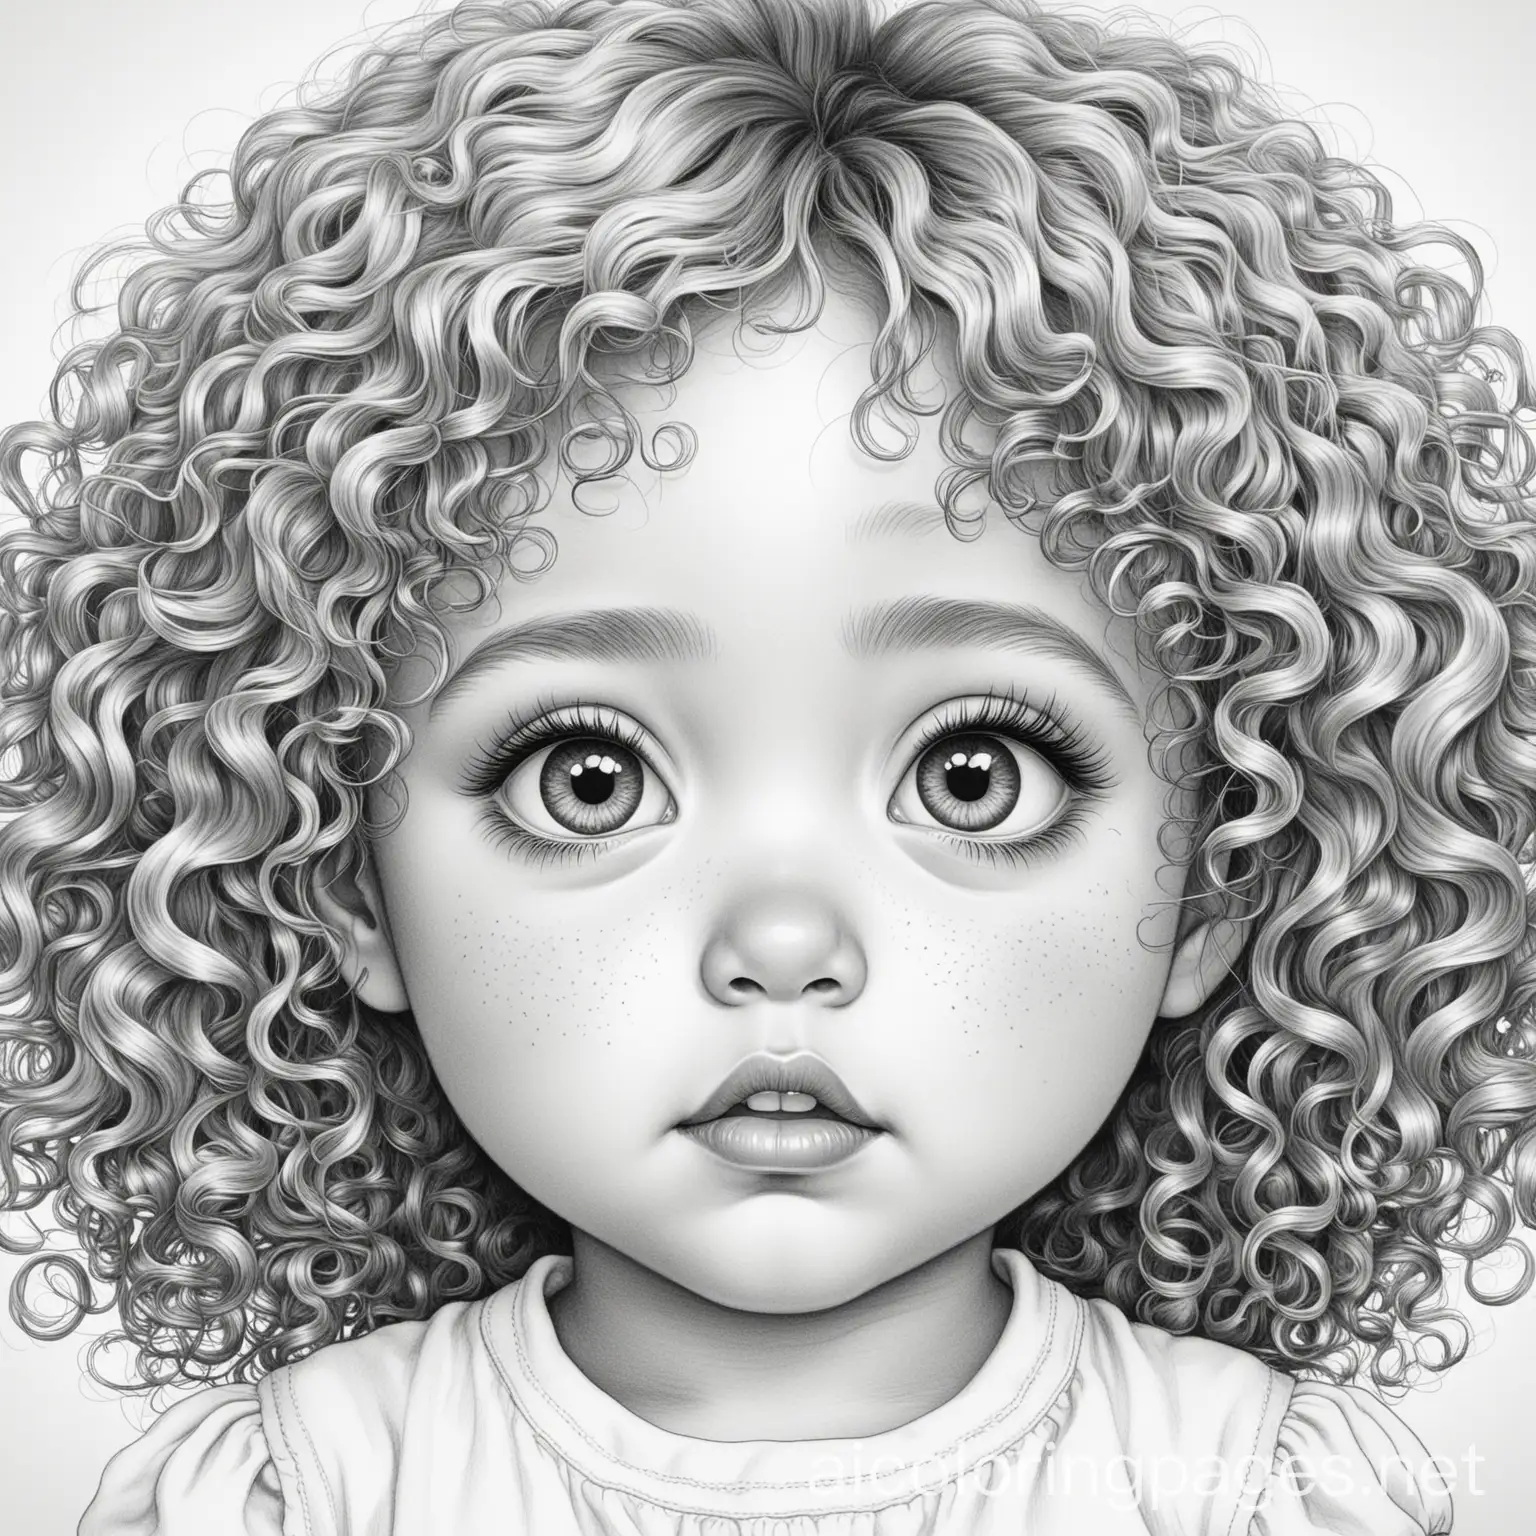 Baby girl with curly hair and big eyes, and a chubby face, Coloring Page, black and white, line art, white background, Simplicity, Ample White Space. The background of the coloring page is plain white to make it easy for young children to color within the lines. The outlines of all the subjects are easy to distinguish, making it simple for kids to color without too much difficulty